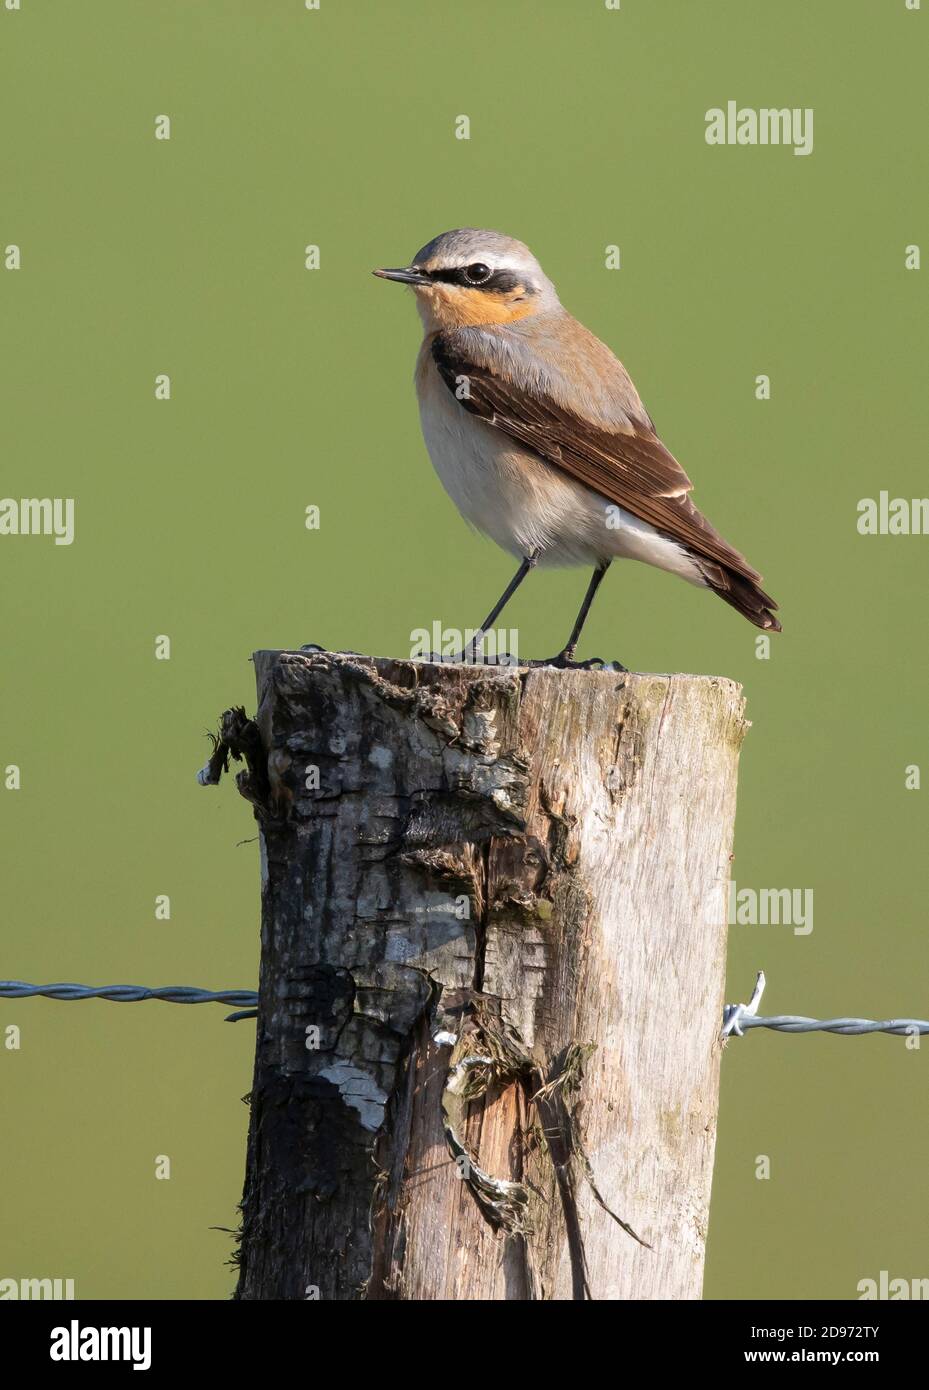 Wheatear (Oenanthe oenanthe) perched on a fence post, England Stock Photo